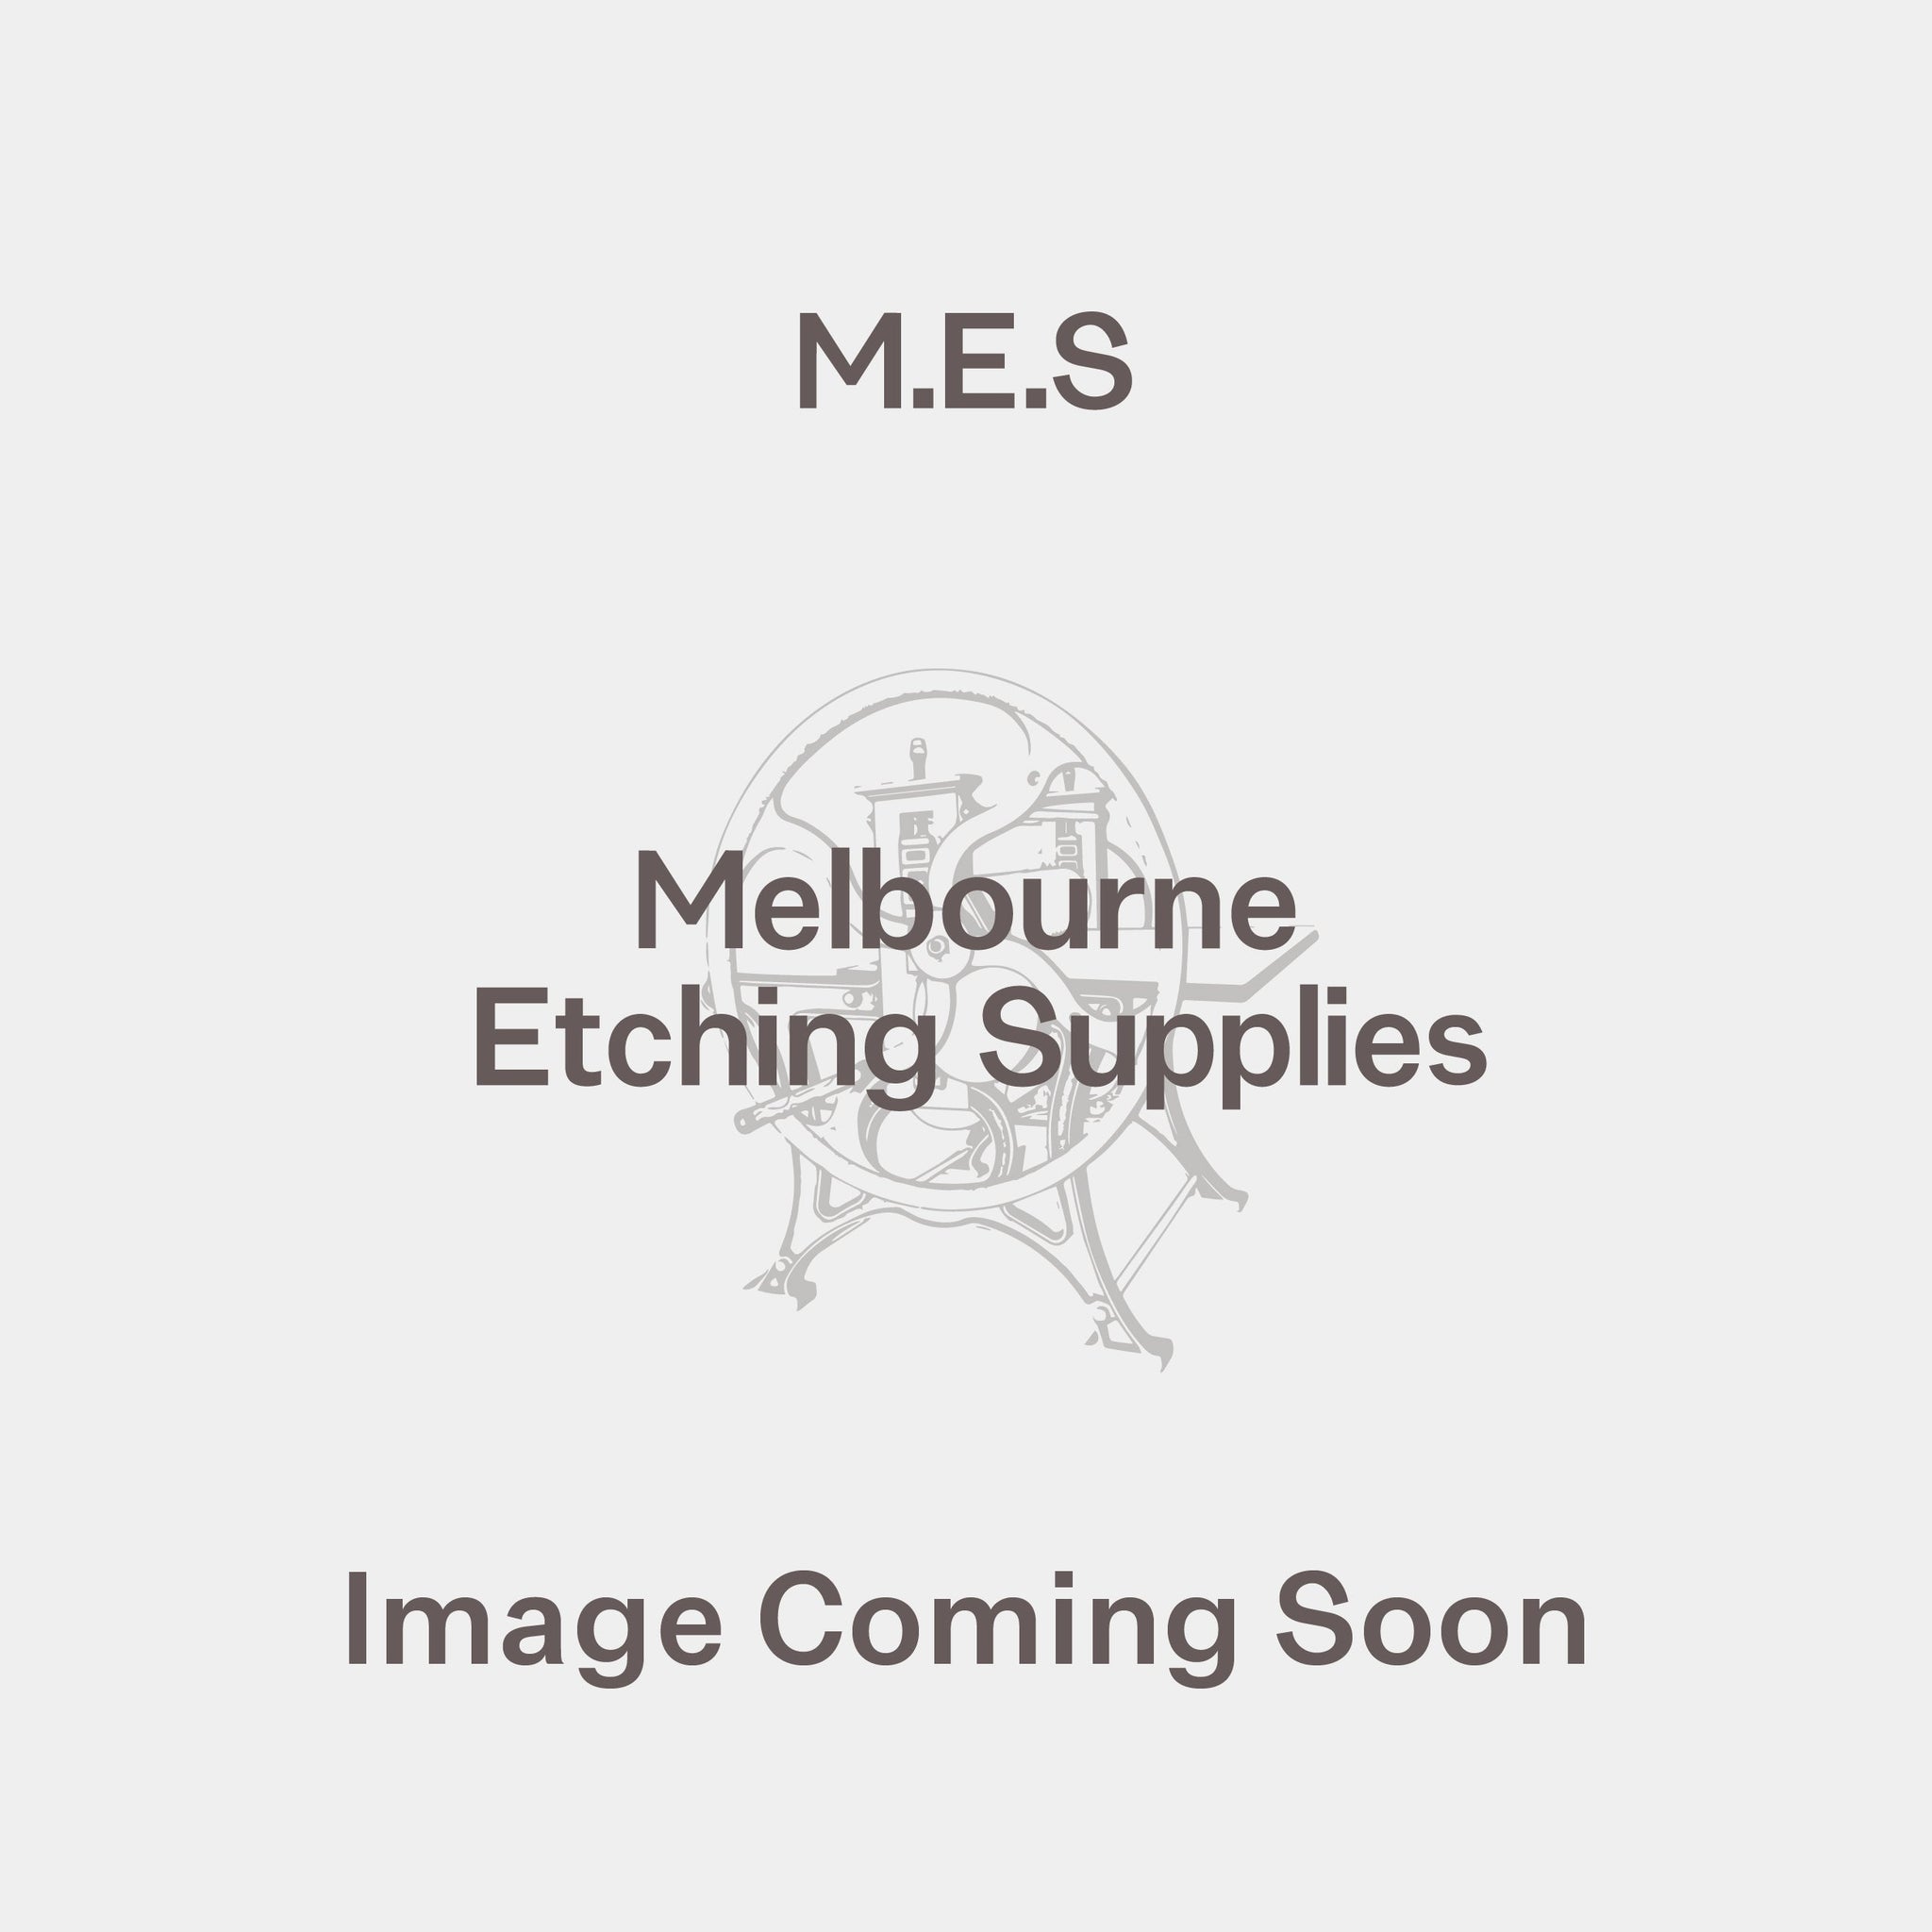 Bulky News 80gsm - Melbourne Etching Supplies